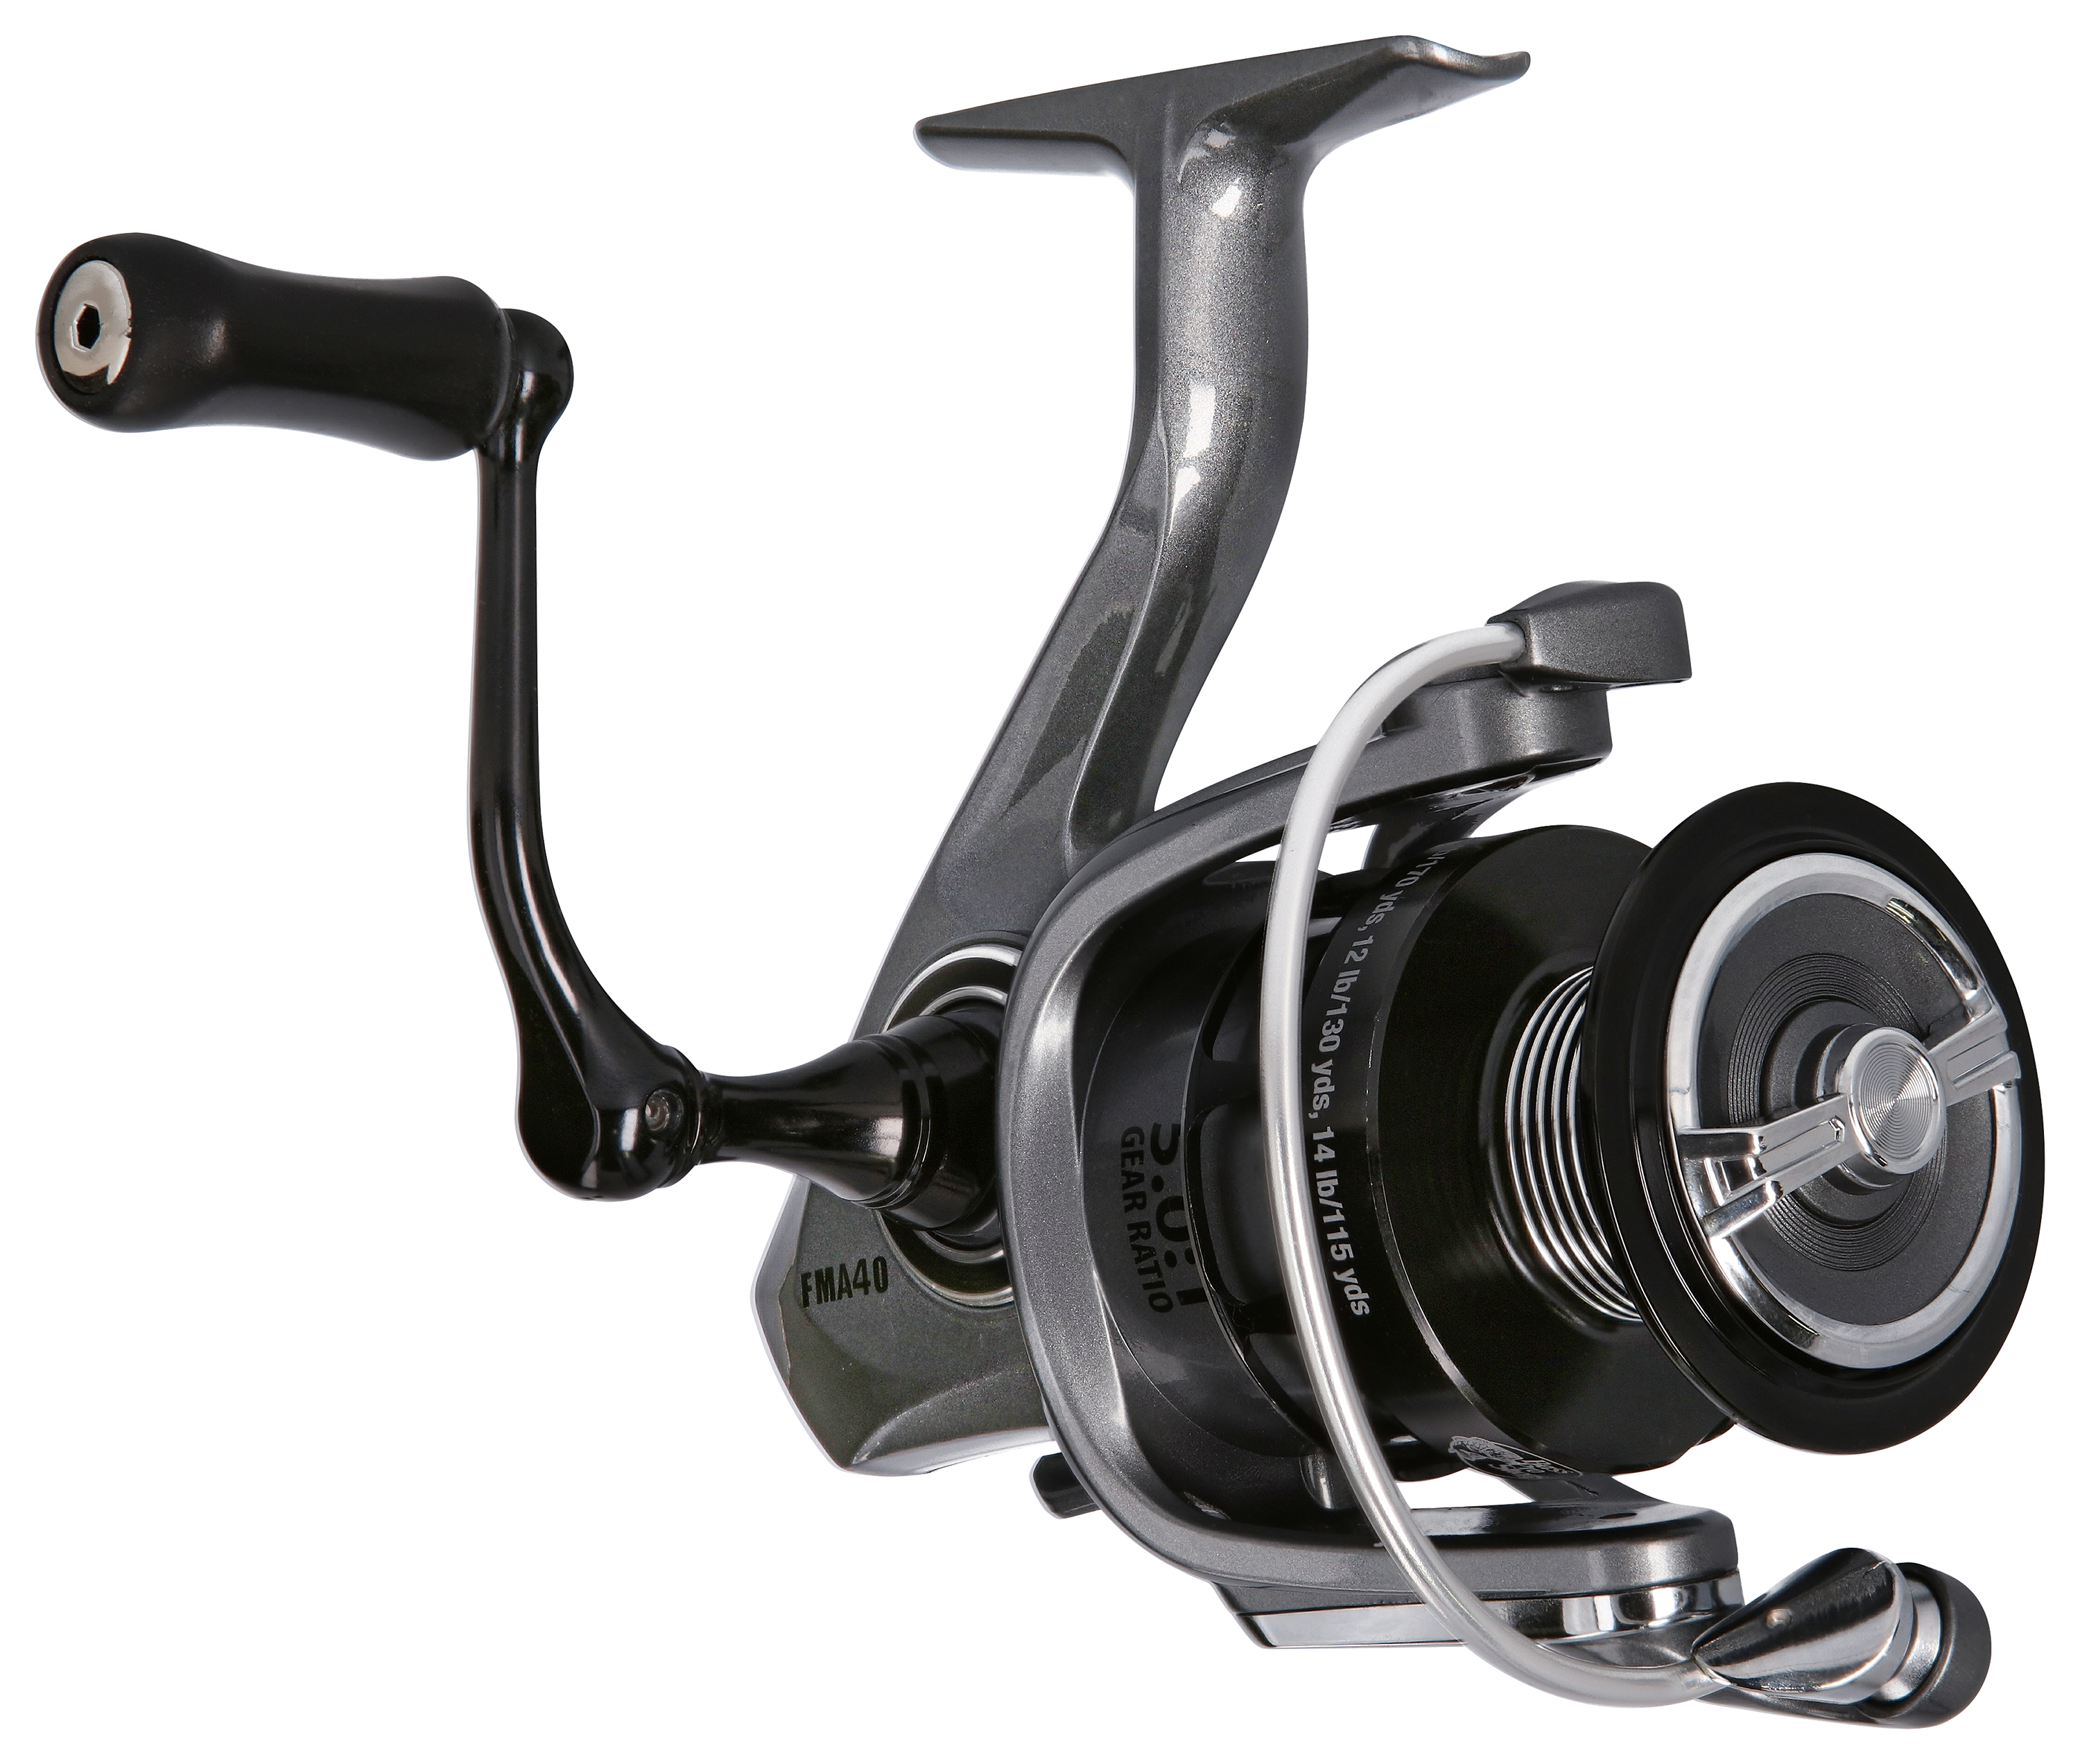 Baitcast Reel Right 5.0: 1 Gear Ratio Fishing Reels for sale